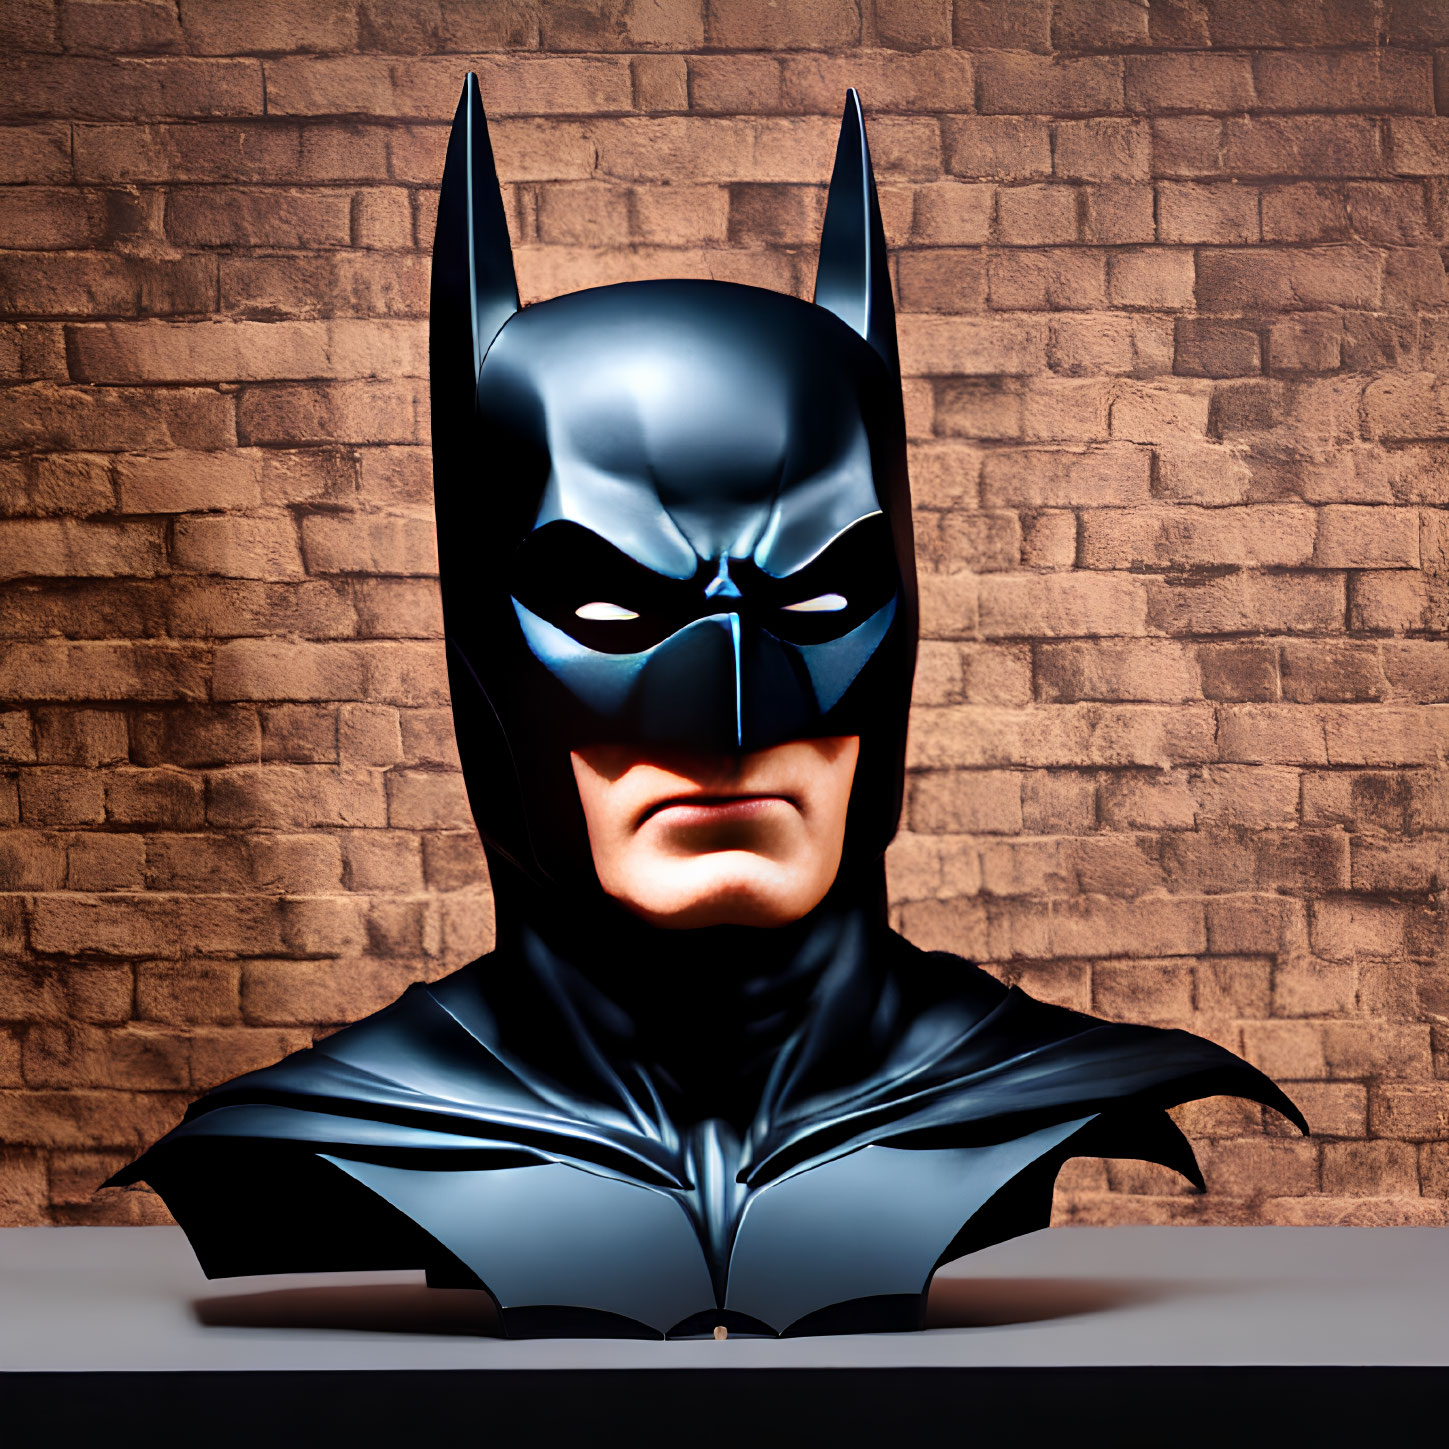 Batman costume with cowl and cape in front of brick wall